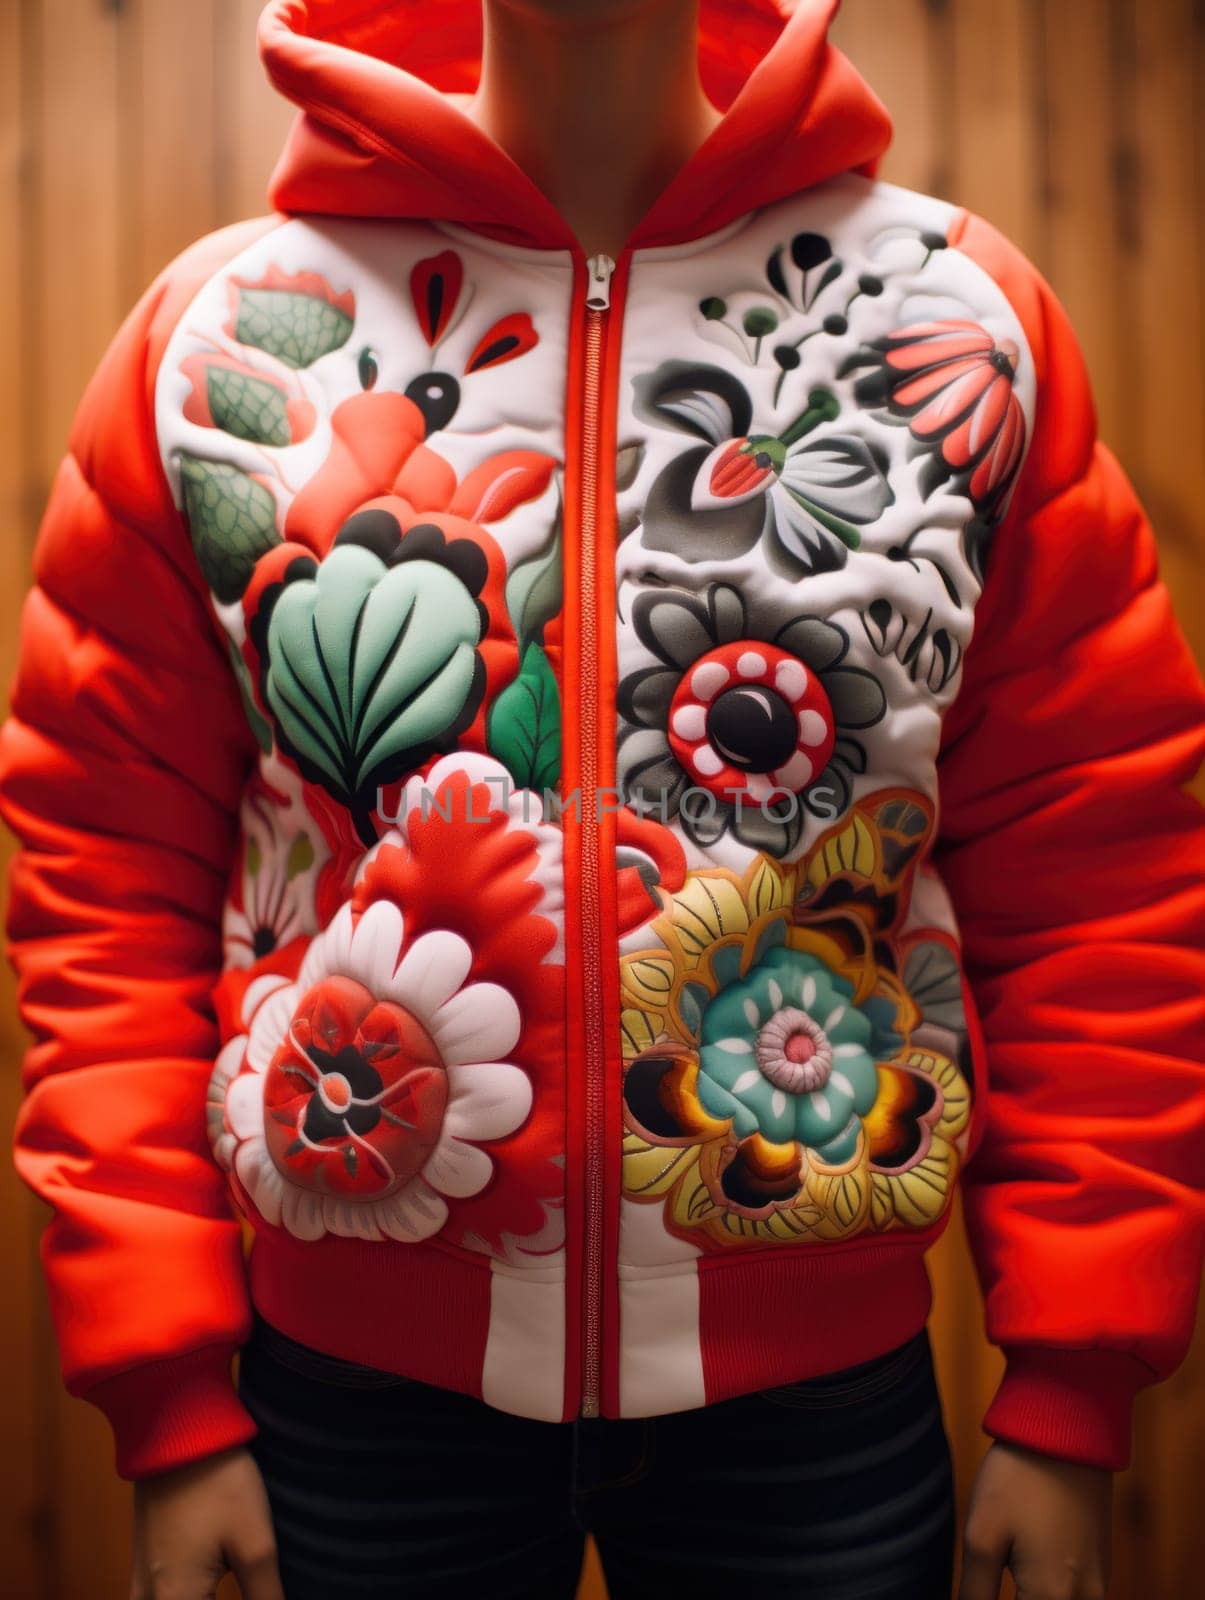 A close up of a person wearing an orange and red jacket, AI by starush